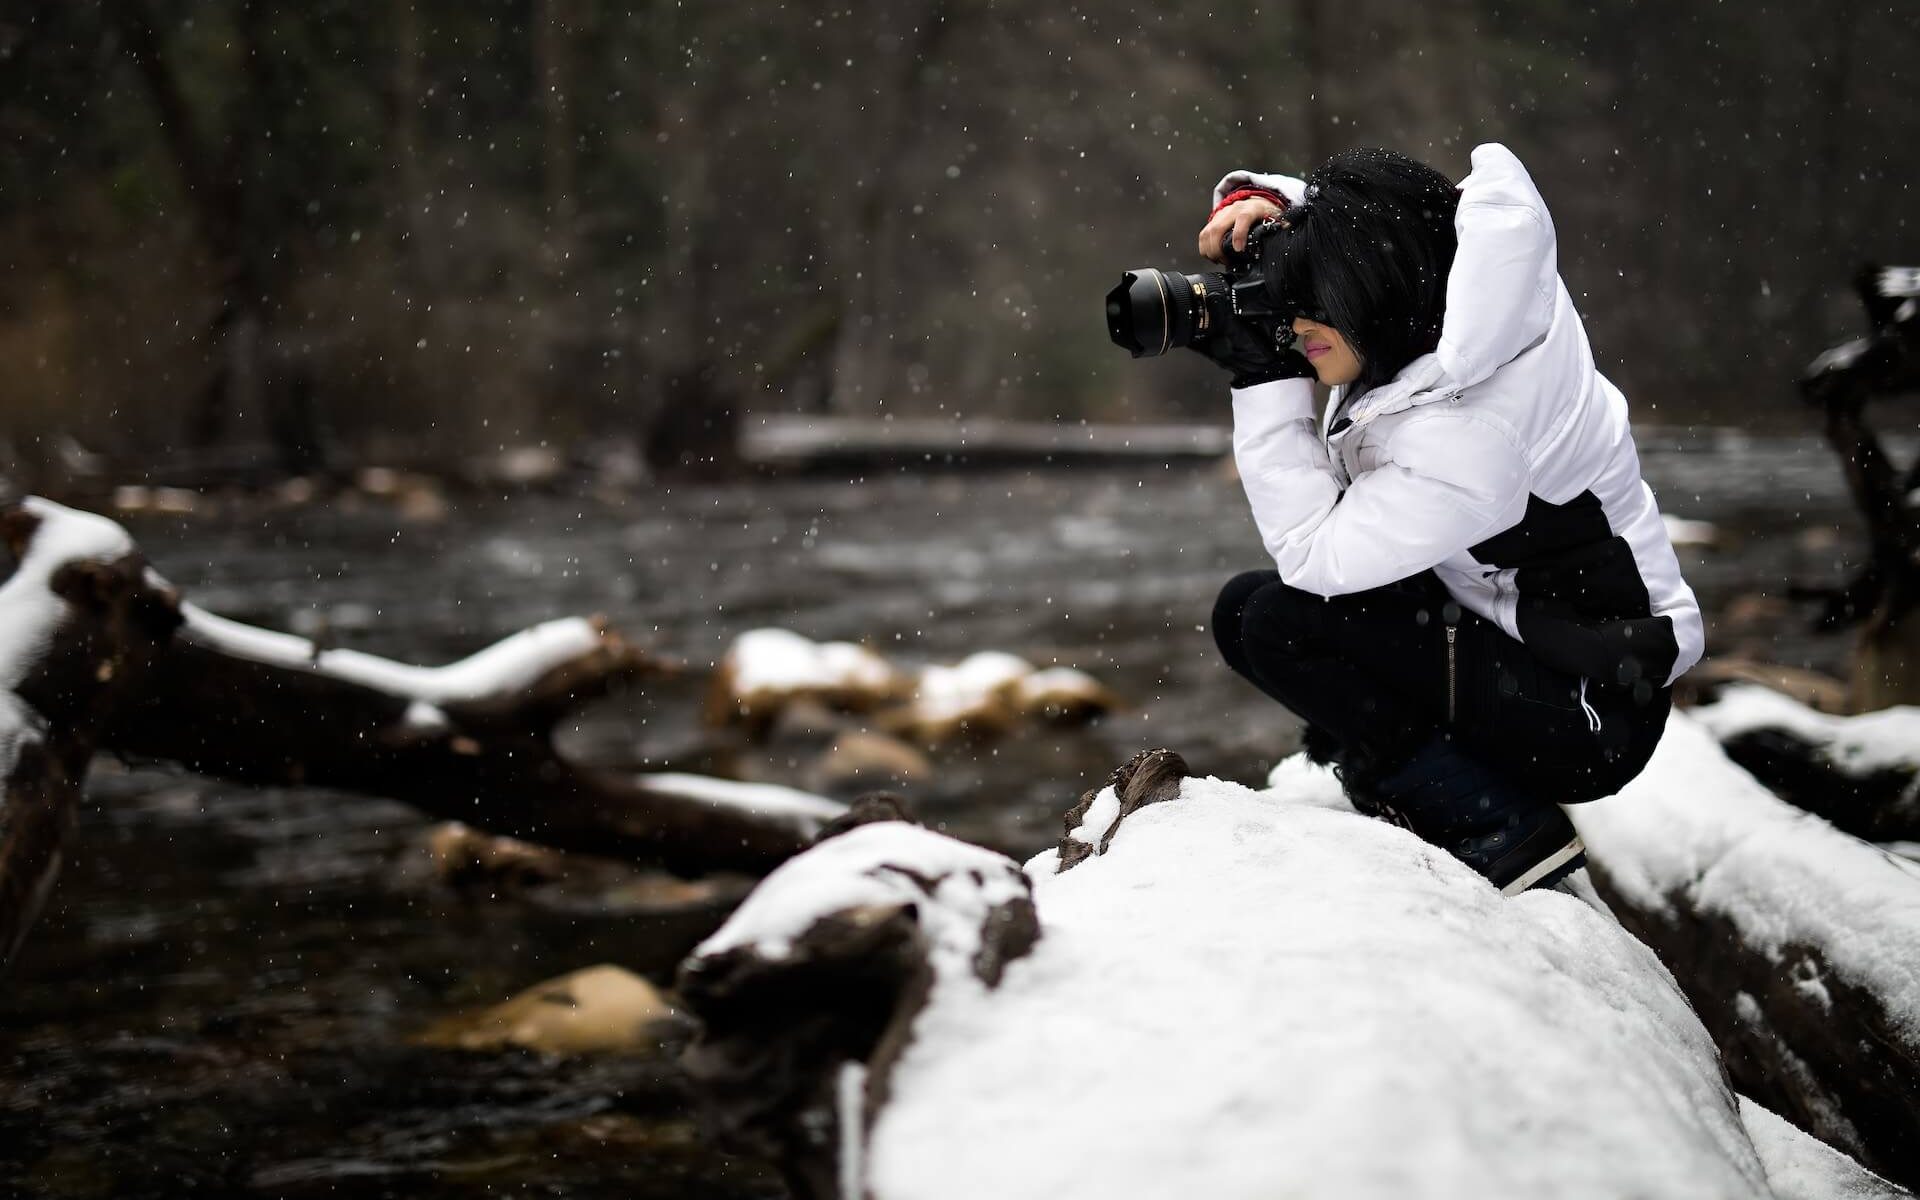 Woman capturing photos in a snowy setting.